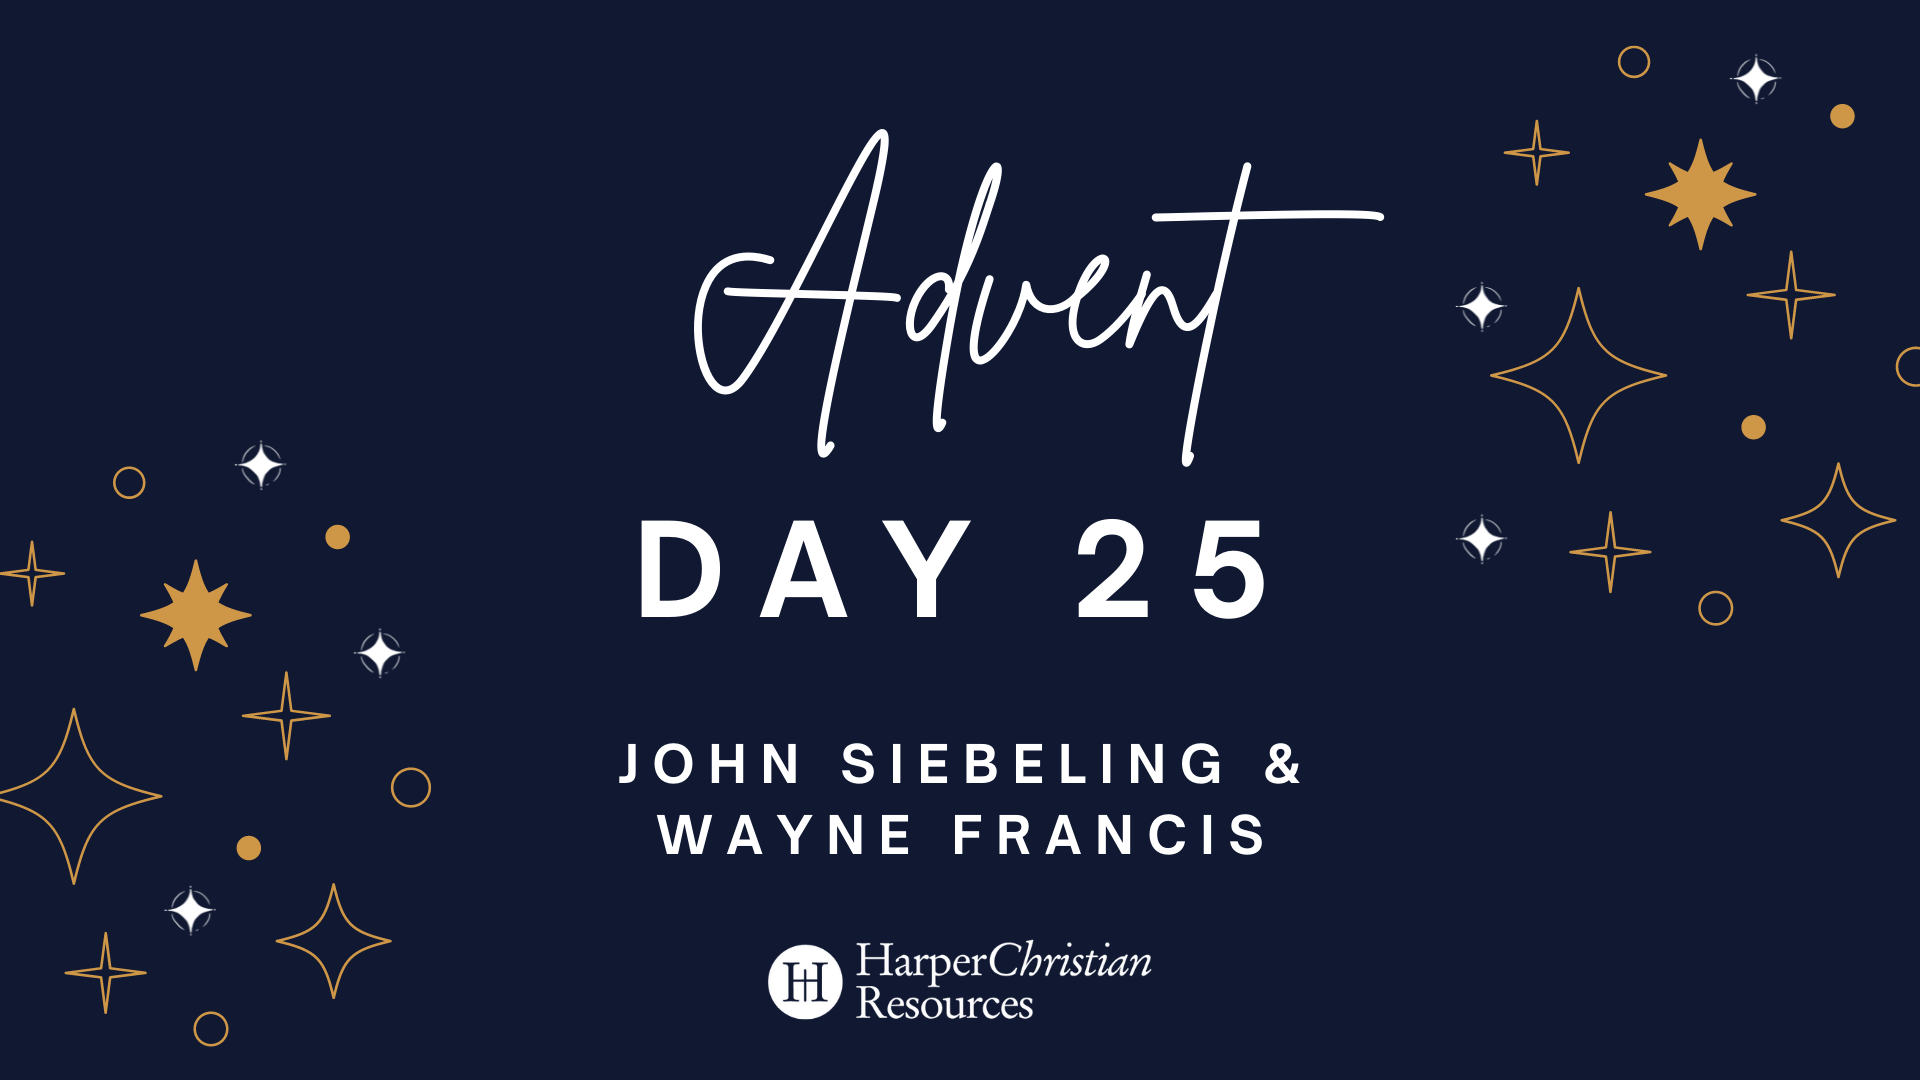 Advent Day 25: A message from John Siebeling & Wayne Francis